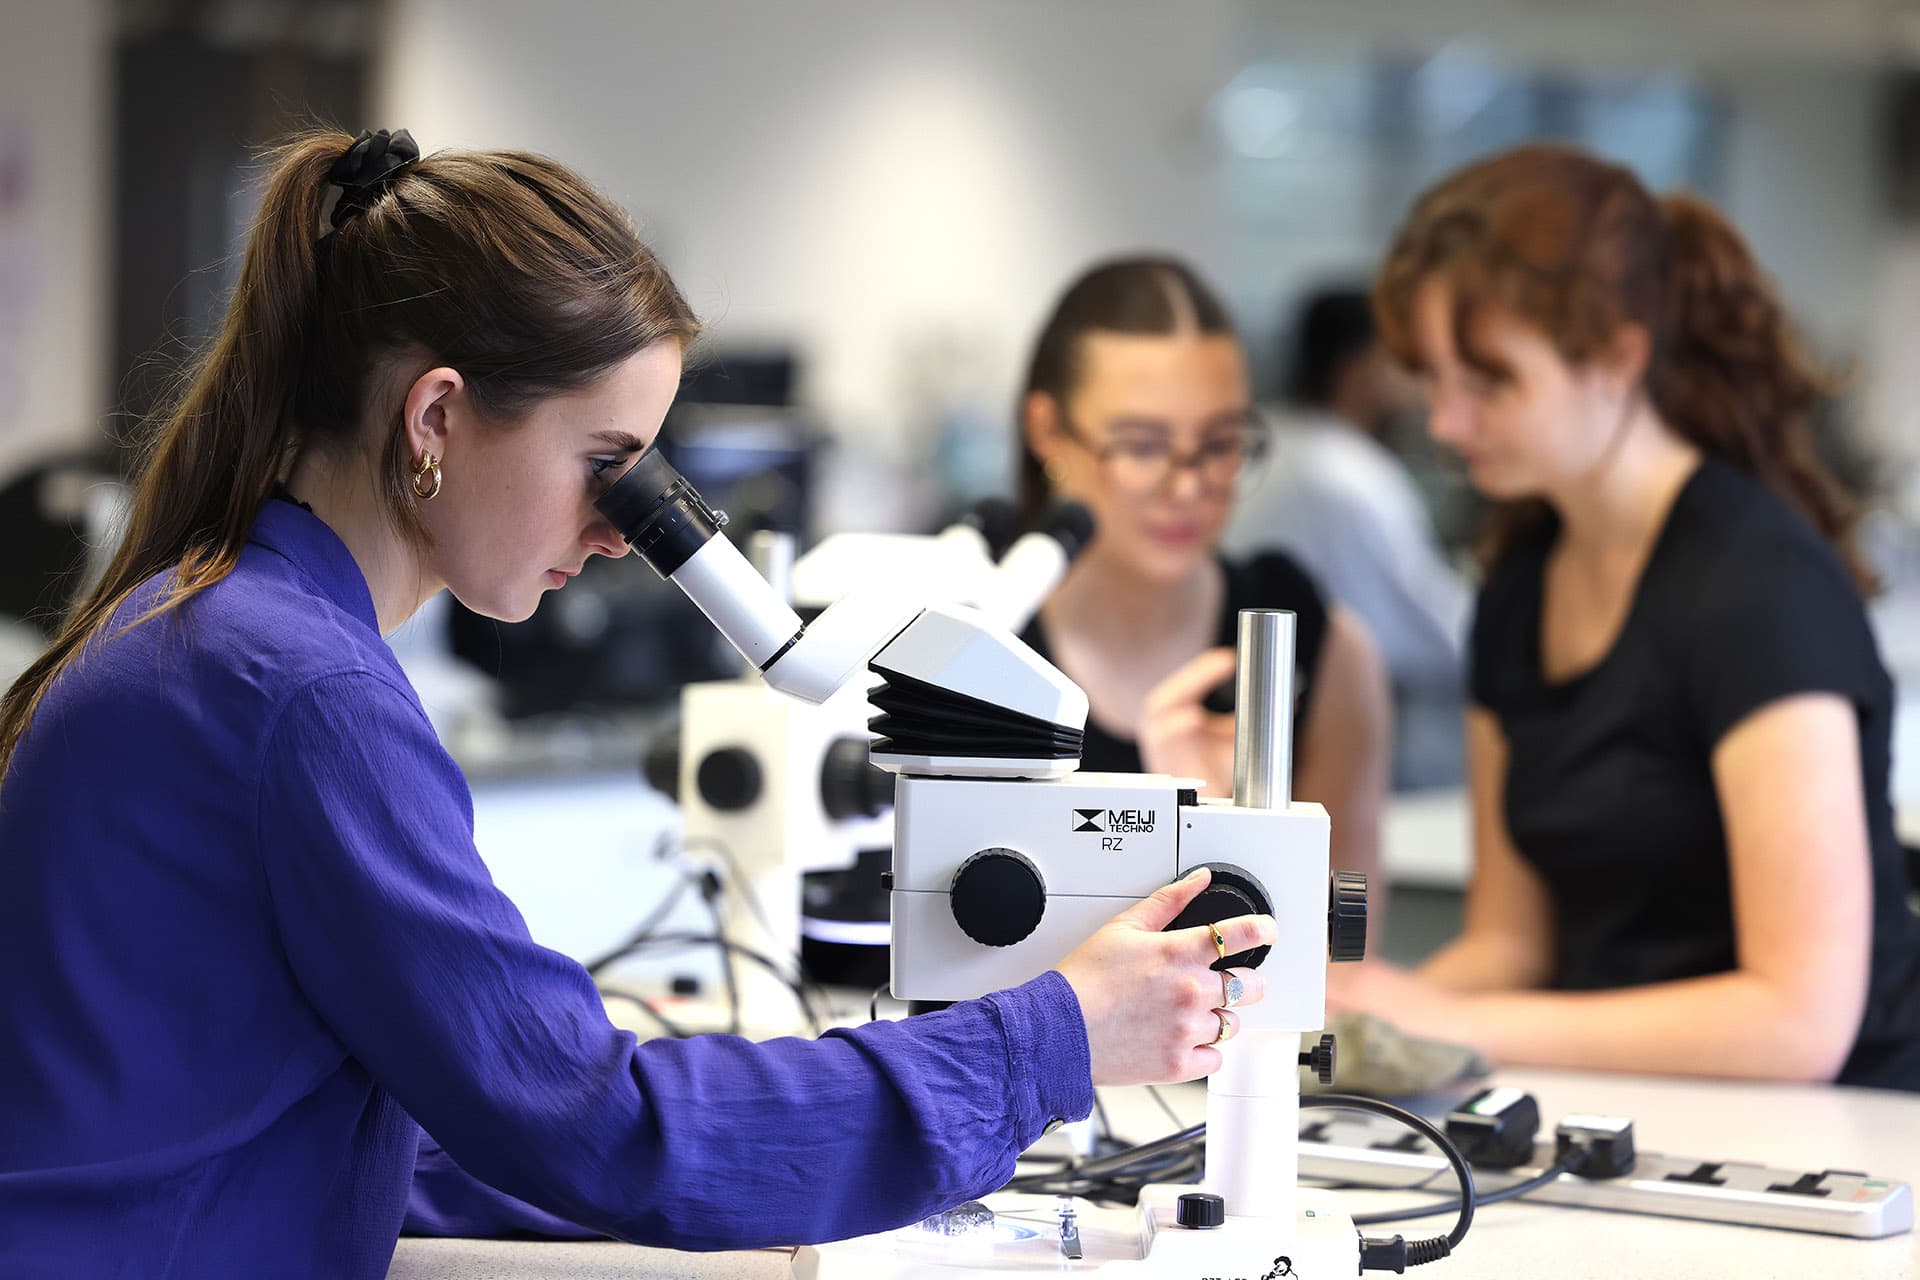 A female student in a royal blue lab coat looks into a microscope.